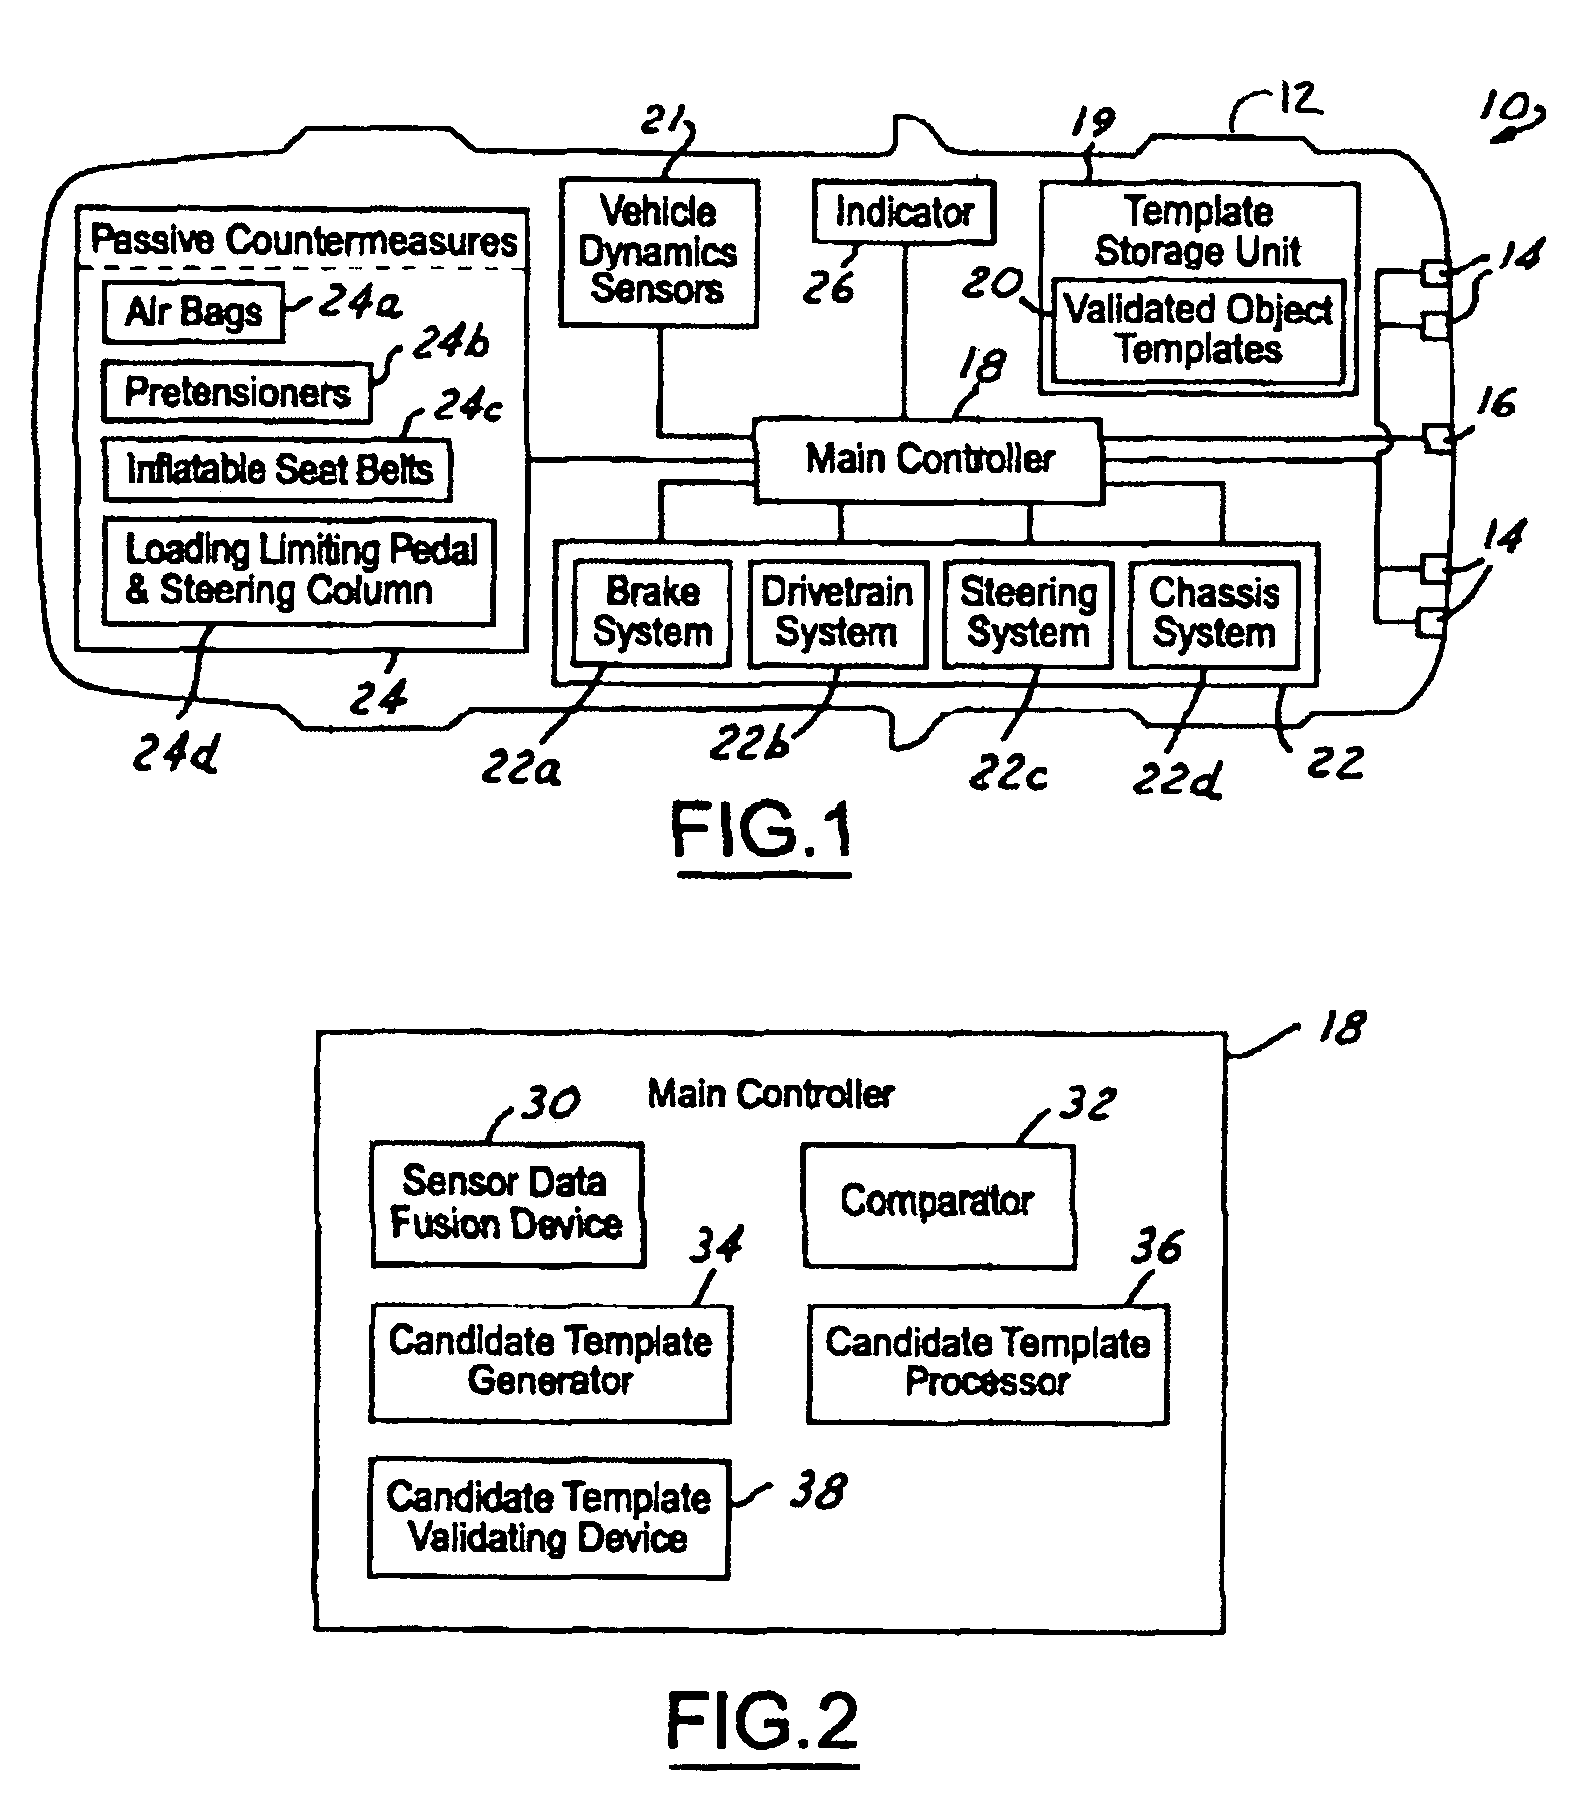 Adaptive template object classification system with a template generator